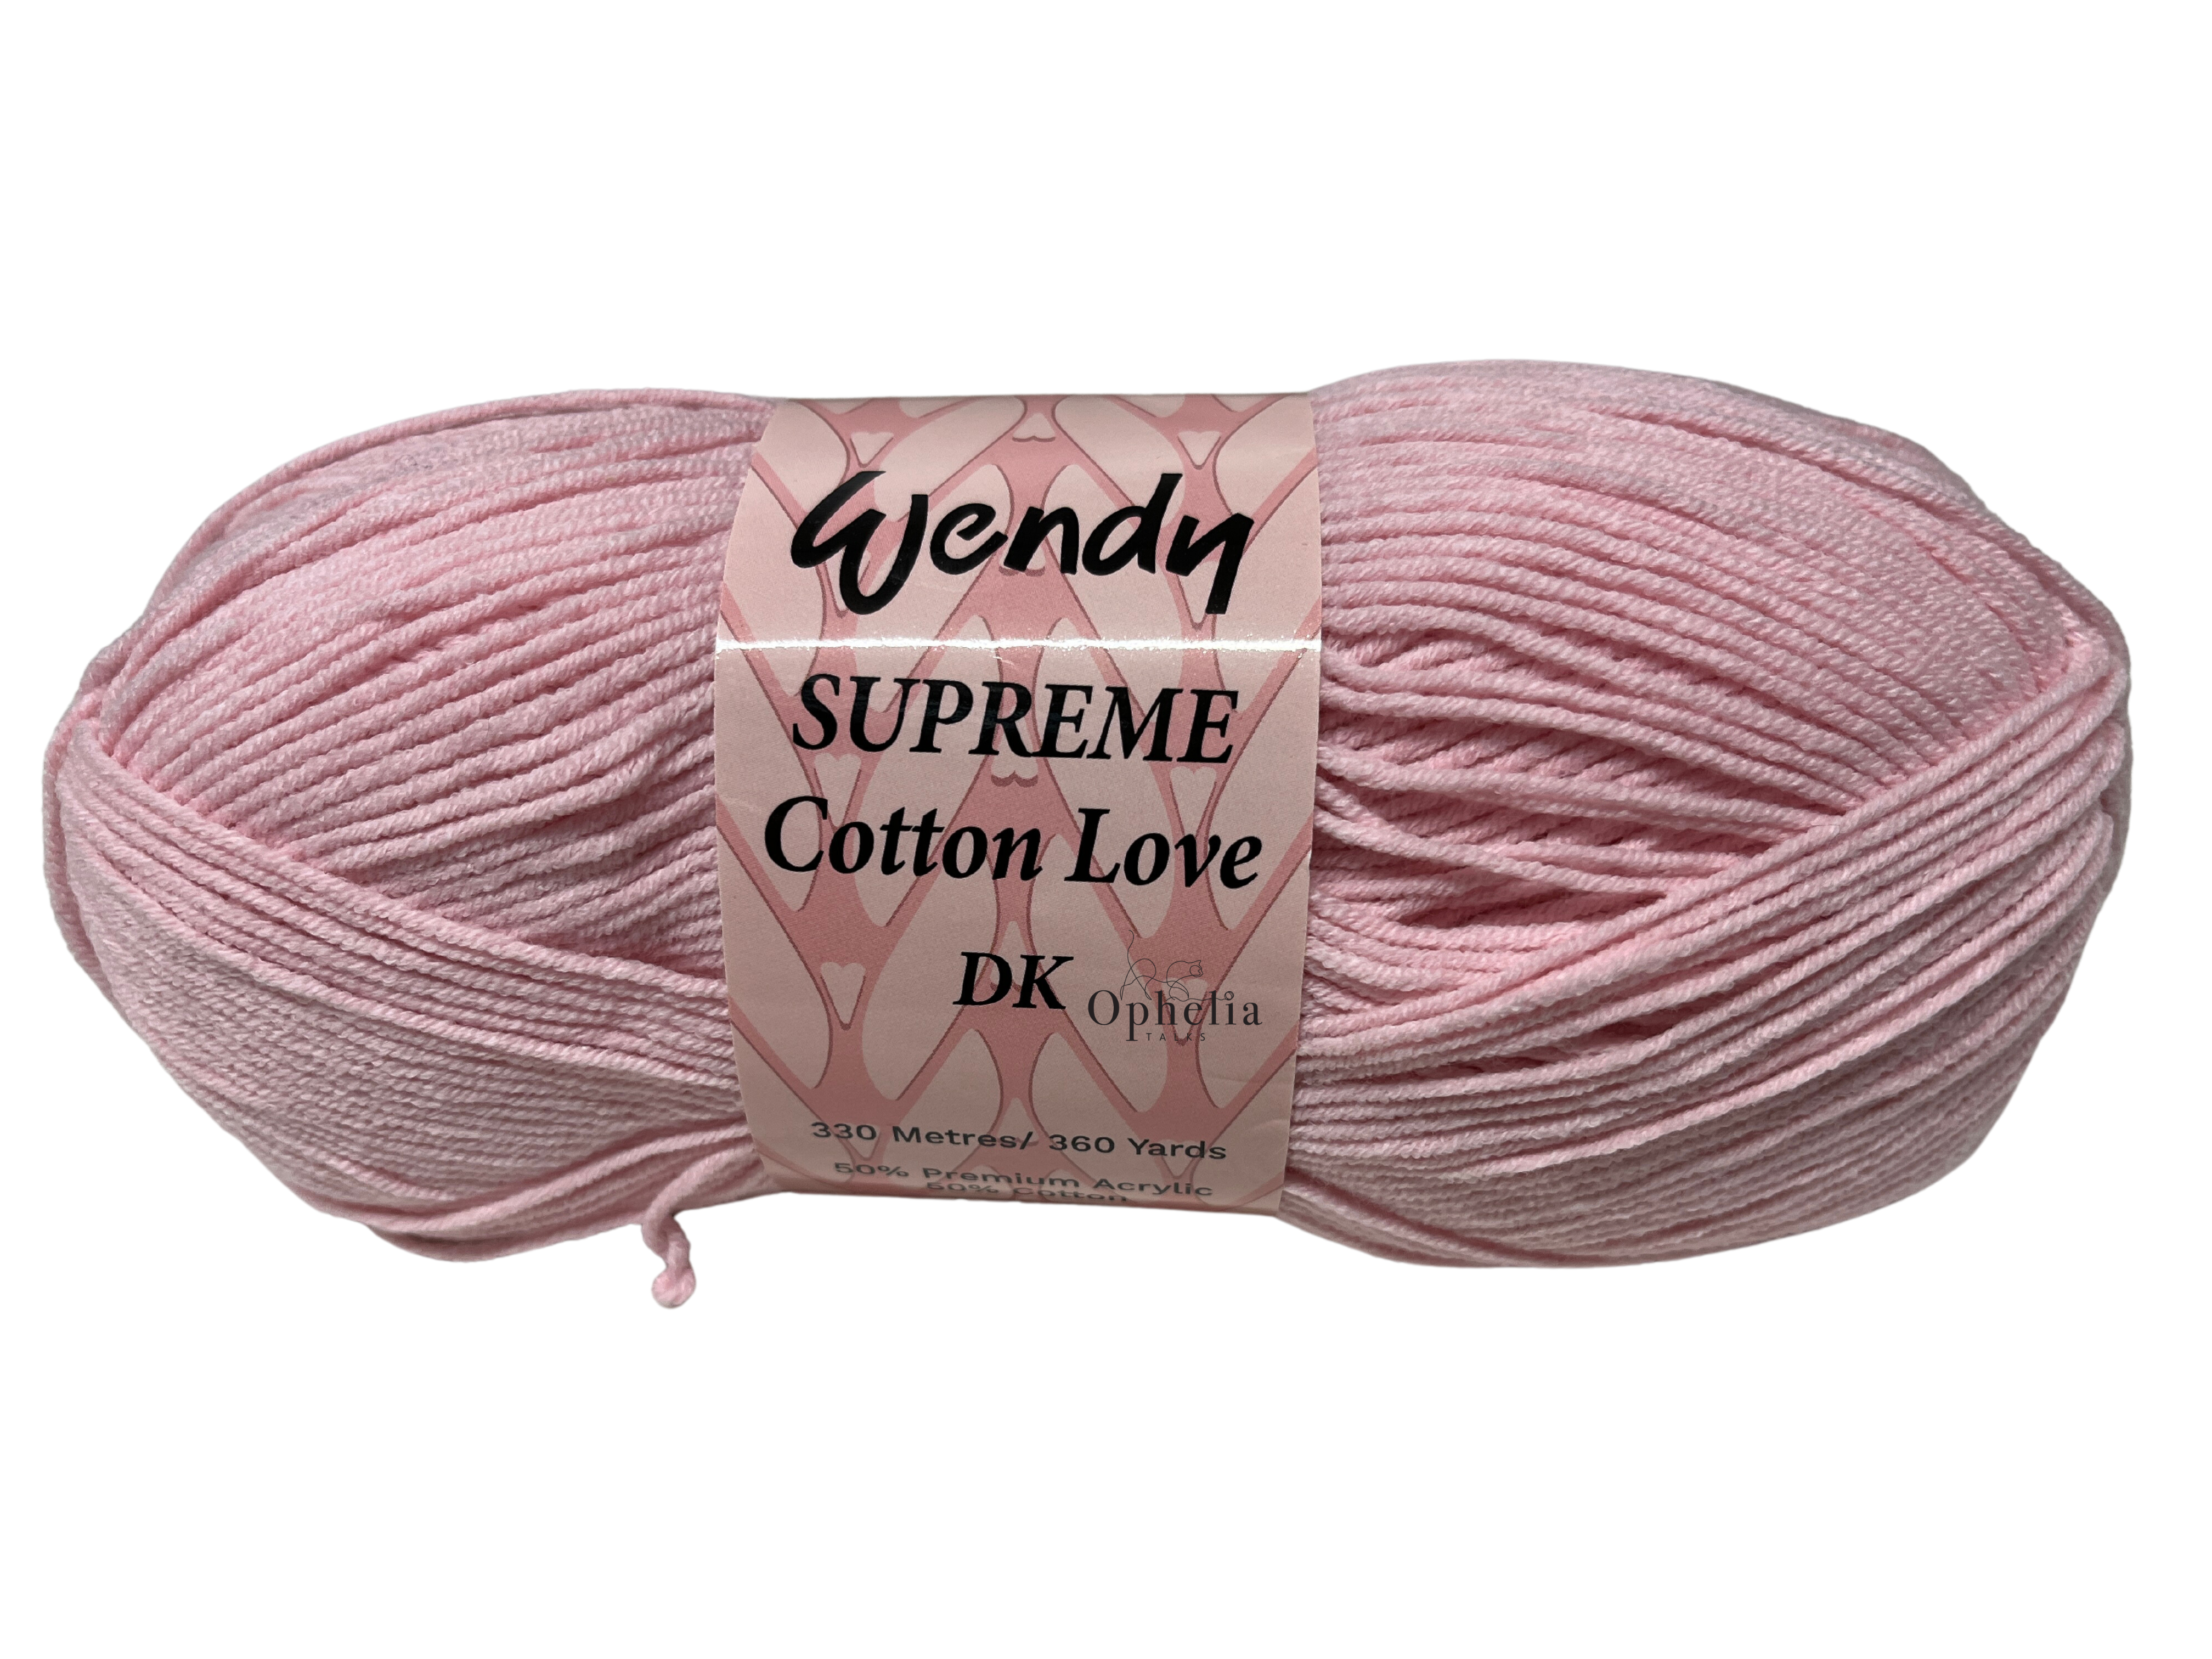 Wendy supreme cotton love in the colour powder pink WCT07